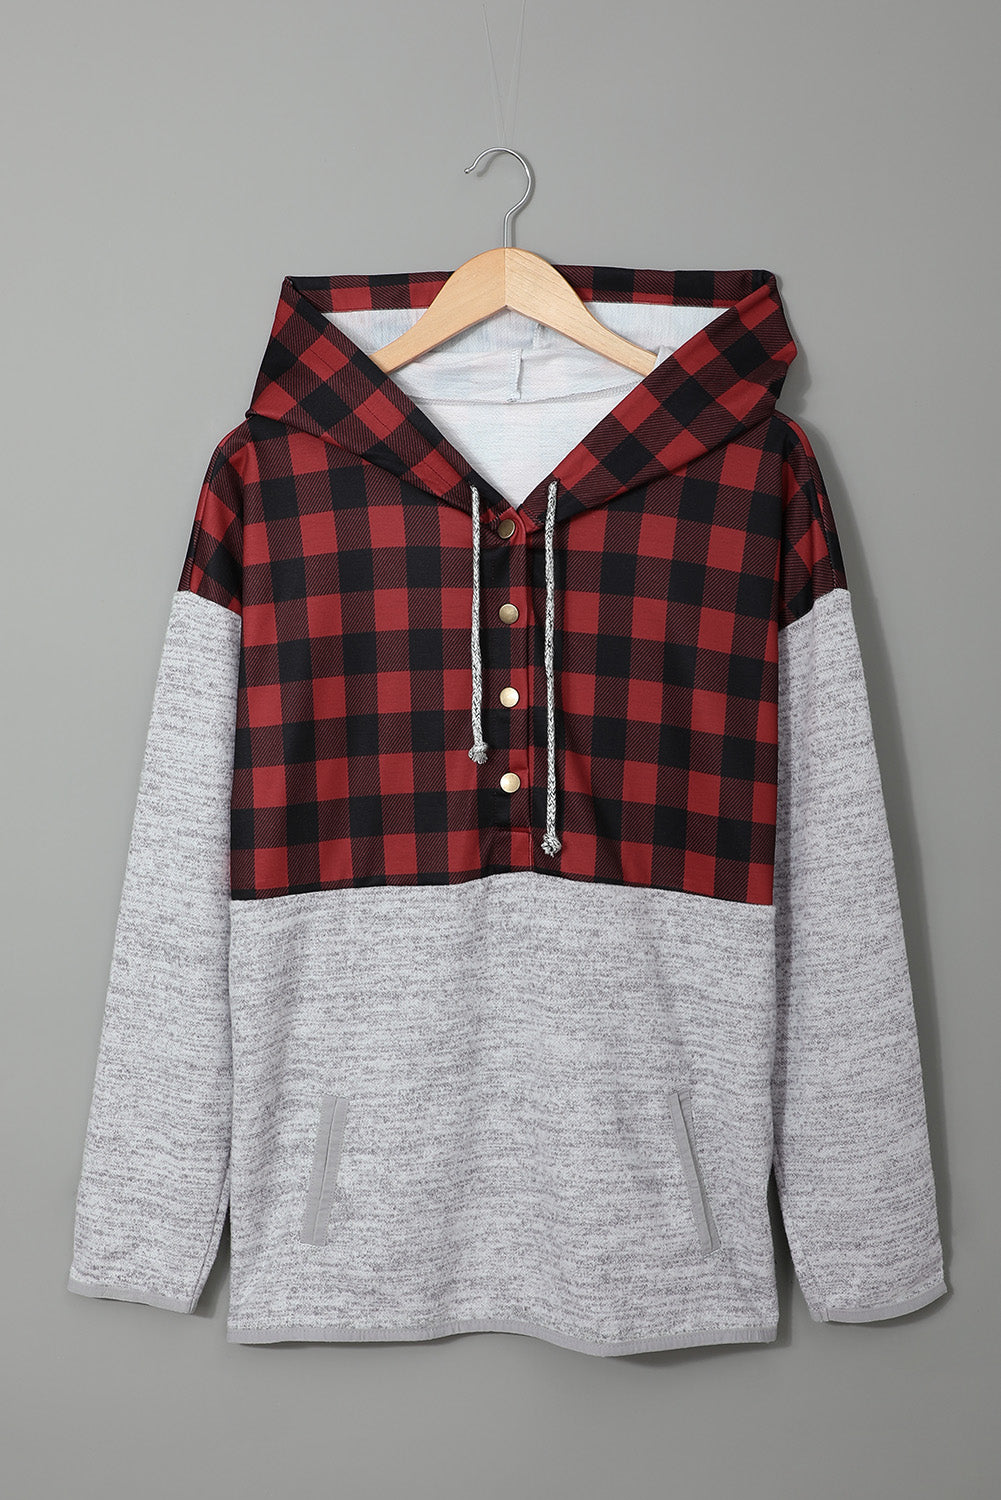 Fiery Red Plaid Splicing Pocketed Gray Hoodie